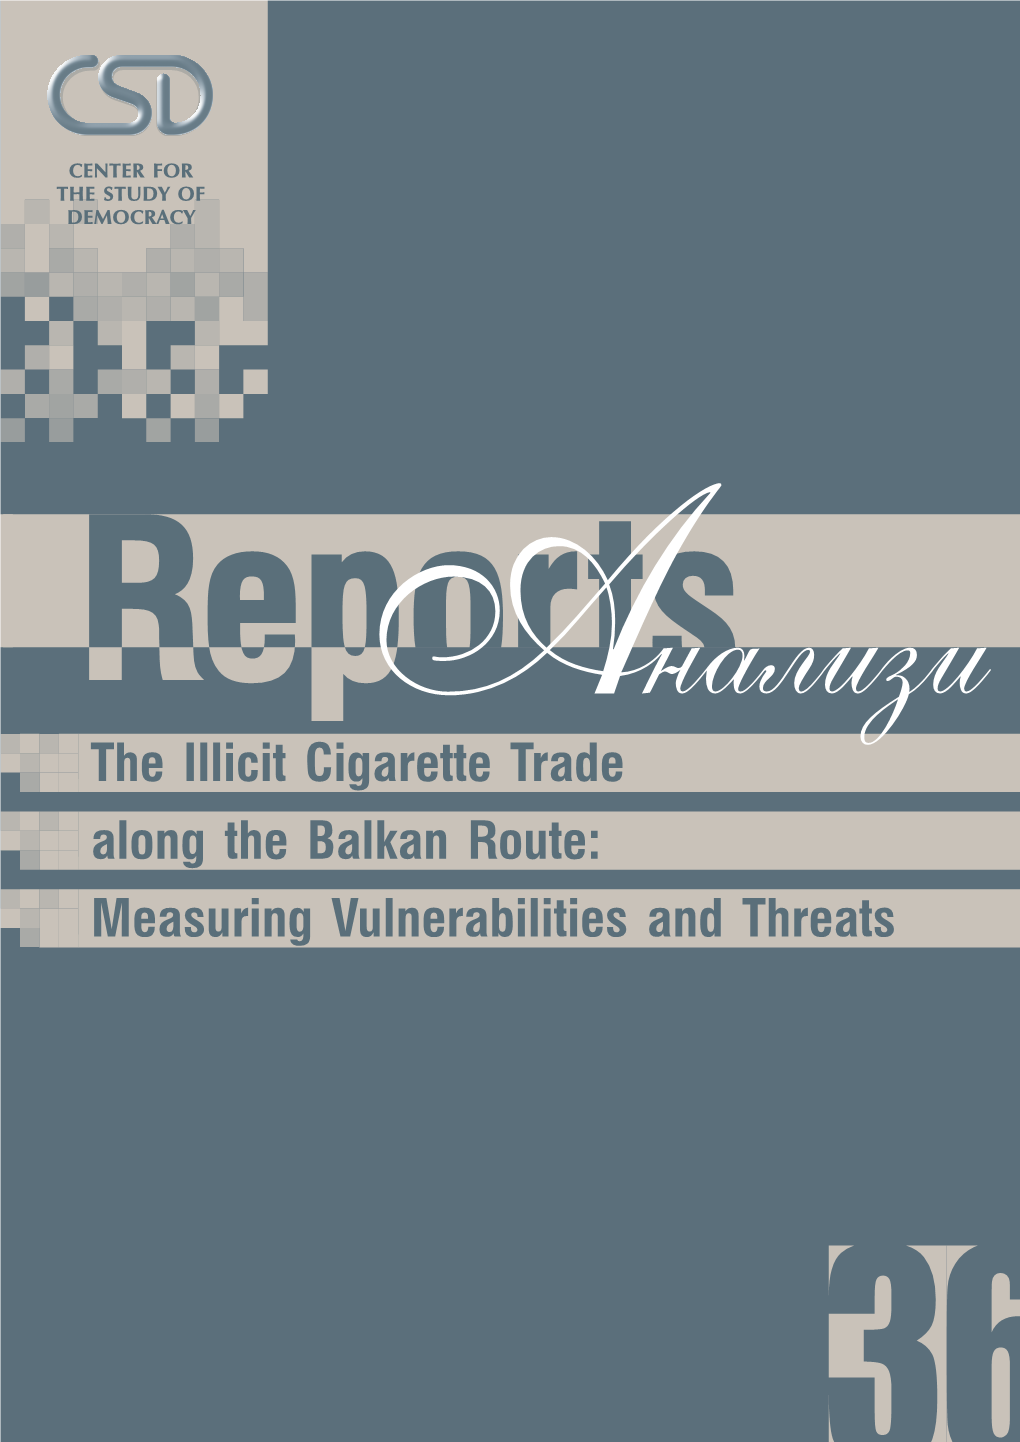 The Illicit Cigarette Trade Along the Balkan Route: Measuring Vulnerabilities and Threats